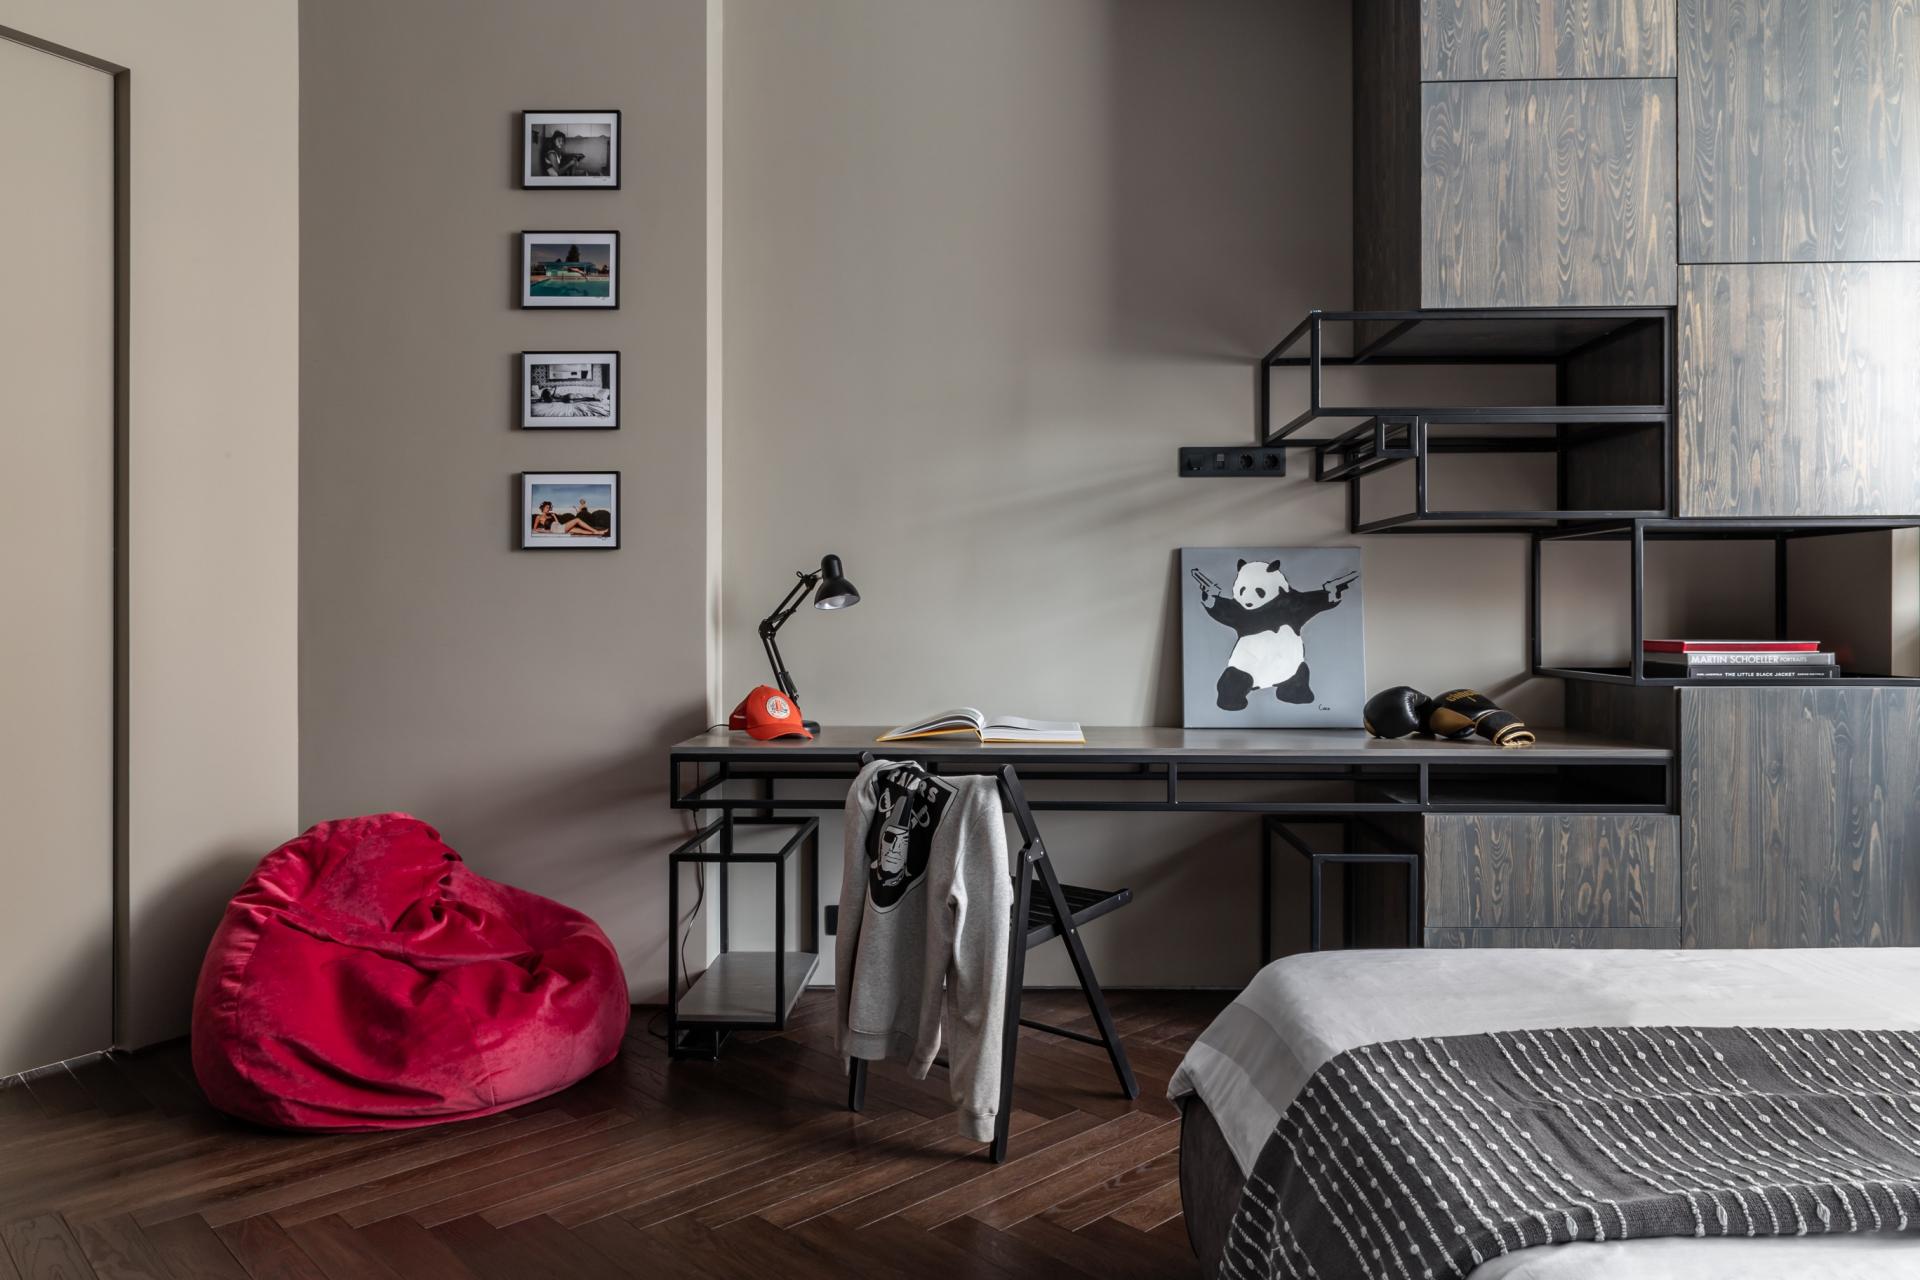 Here's a look inside a 1,700 sq. ft. Moscow apartment for a creative couple